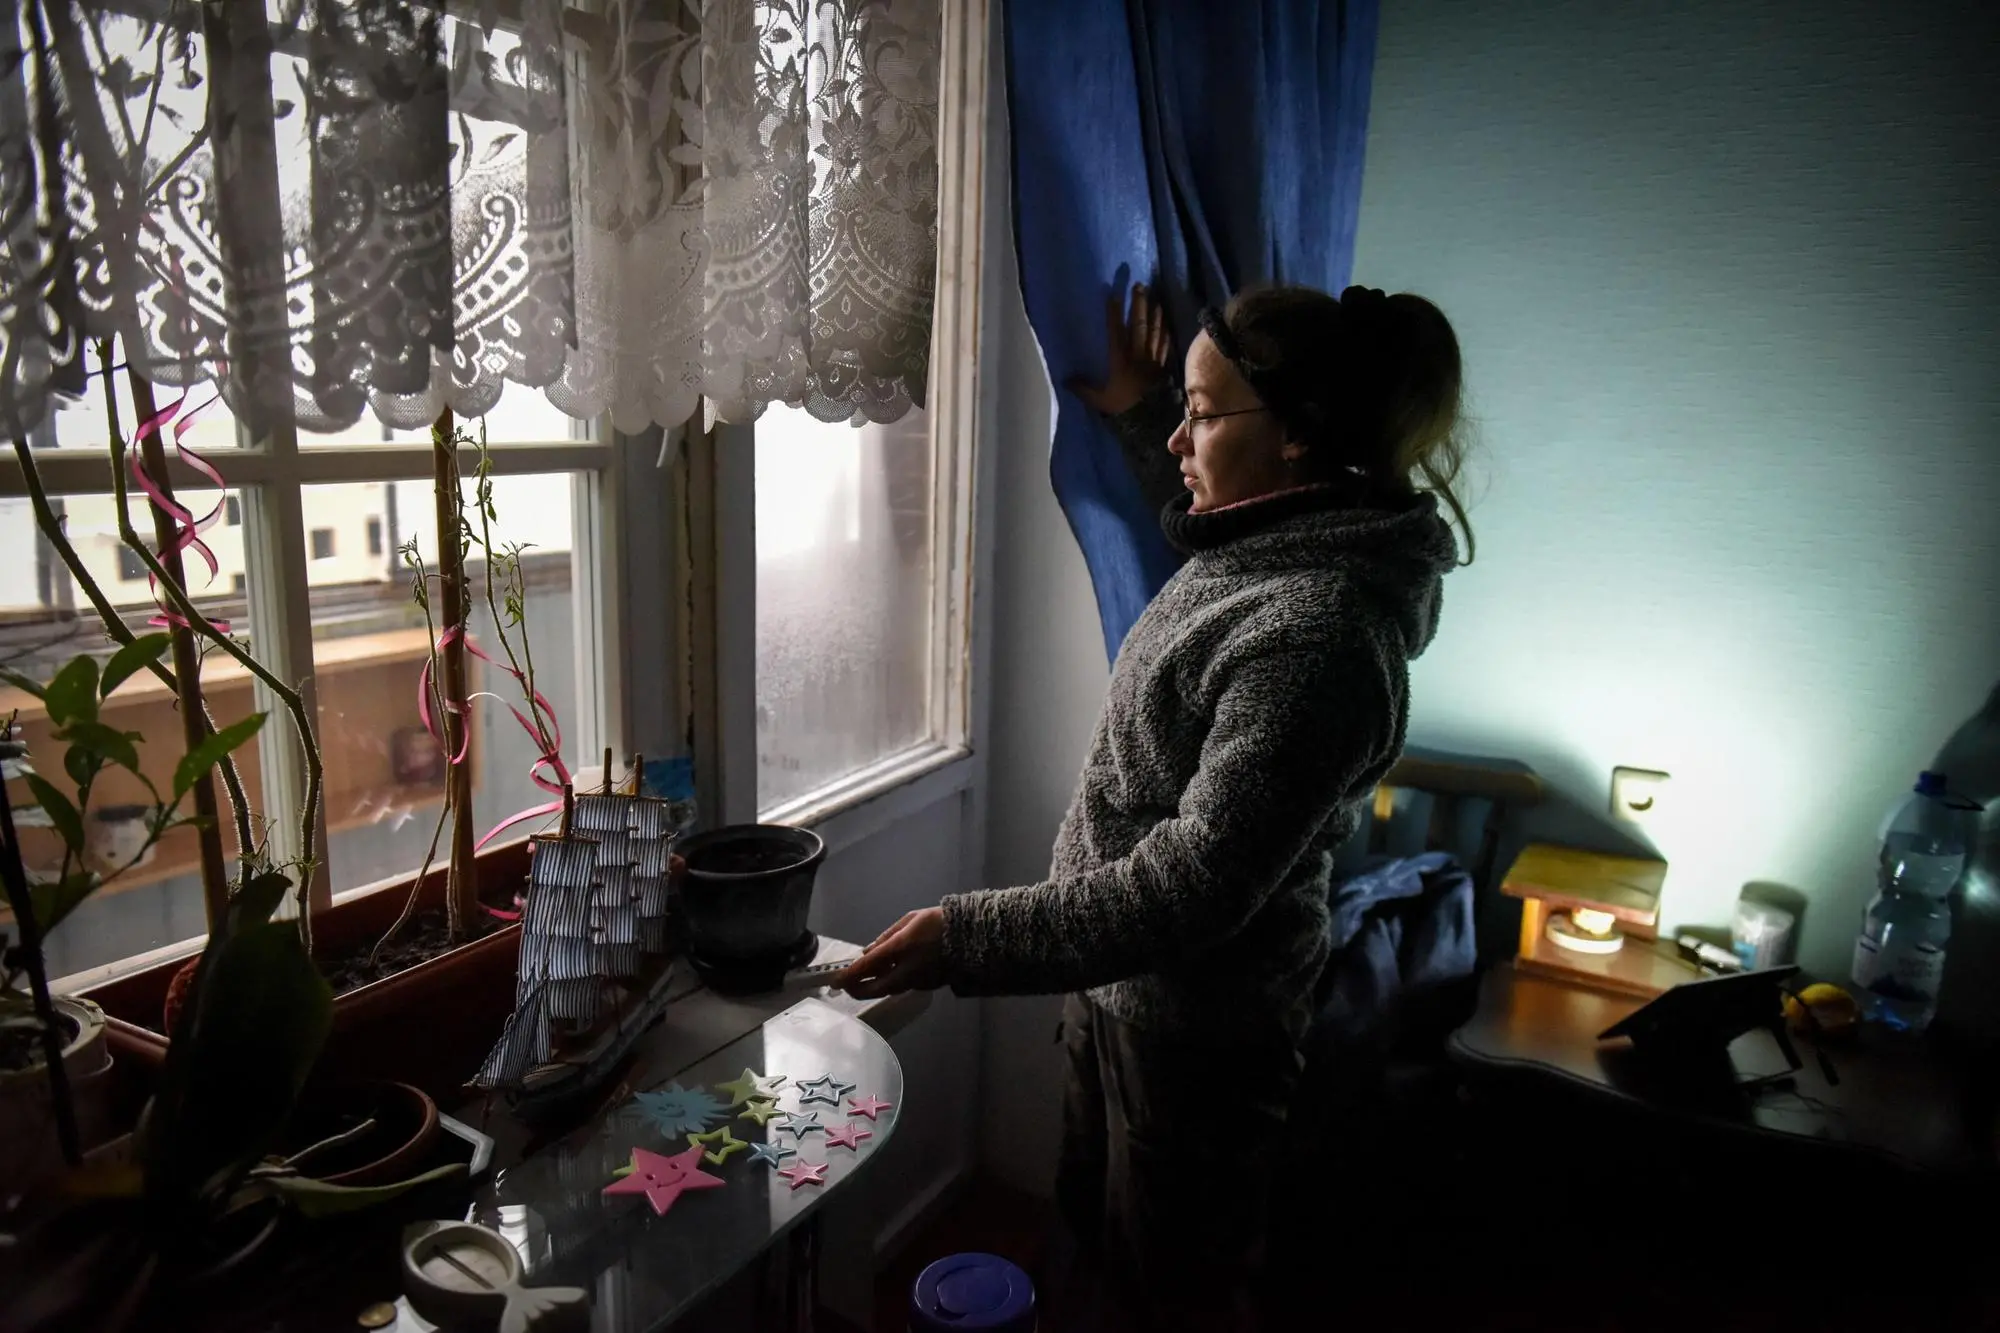 epaselect epa10347135 Tetiana demonstrates the functioning of a lamp (R, back) charging from a solar panel, inside her flat at a damaged apartment block in Horenka, near Kyiv, Ukraine, 03 December 2022. Tetiana and her husband, Ihor, returned to their flat in April after the apartment block was damaged by Russian shelling during combat in the Kyiv region last March. The building was partially destroyed in the attack, but their flat, currently without water and electricity supply, survived. In November 2022, street artist Banksy painted a series of artworks in Ukraine, including at this damaged building in Horenka. Russian troops on 24 February entered Ukrainian territory, starting a conflict that provoked destruction and a humanitarian crisis. EPA/OLEG PETRASYUK